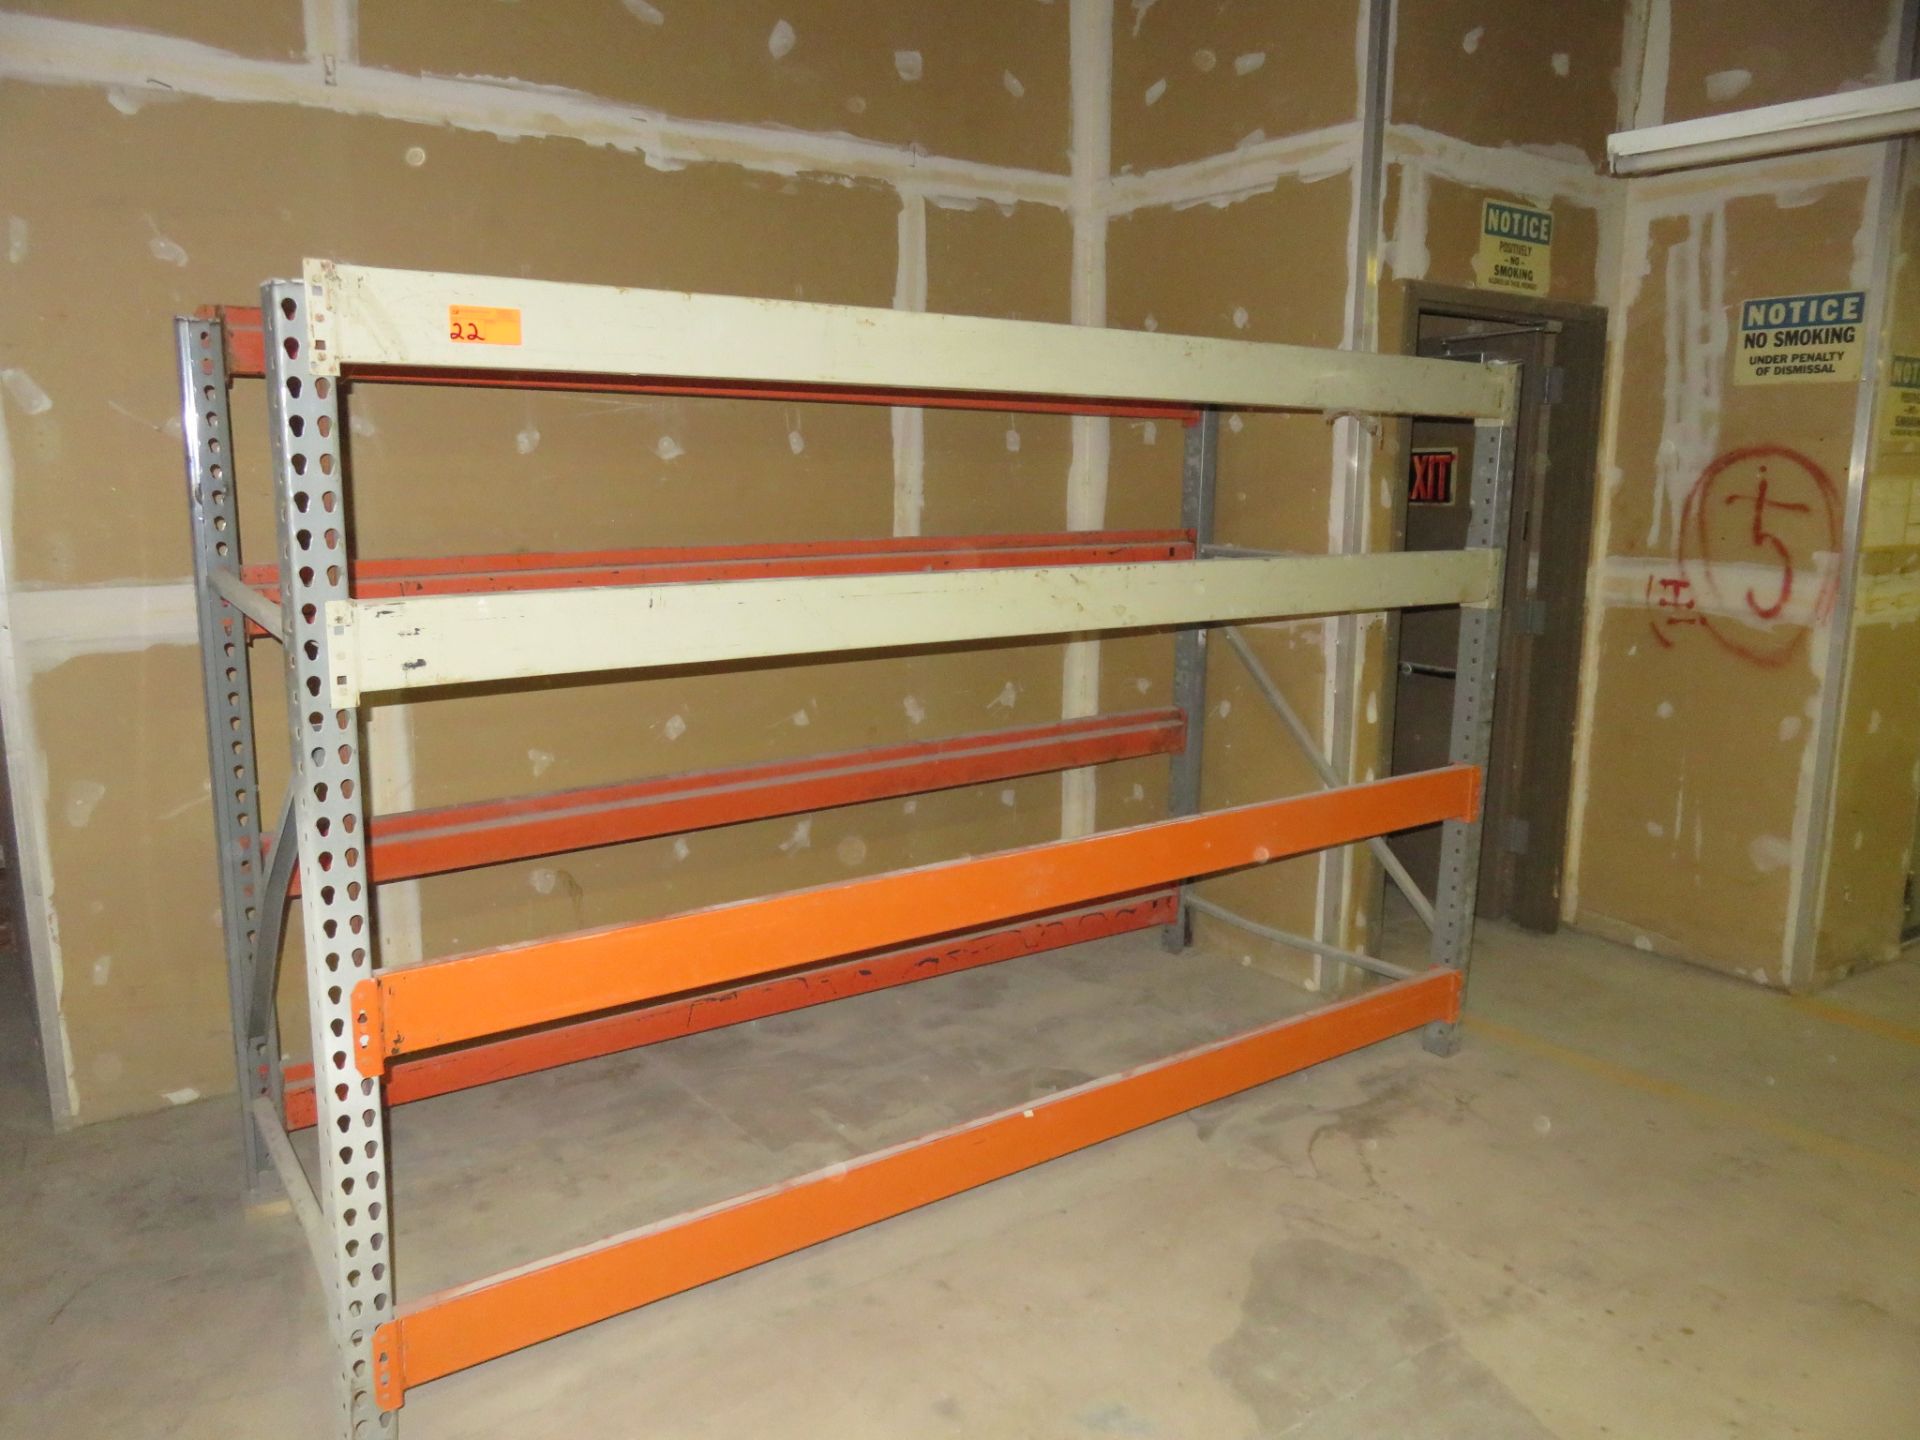 Warehouse Pallet Racking 1 Section approx 108"x 42"x 72"